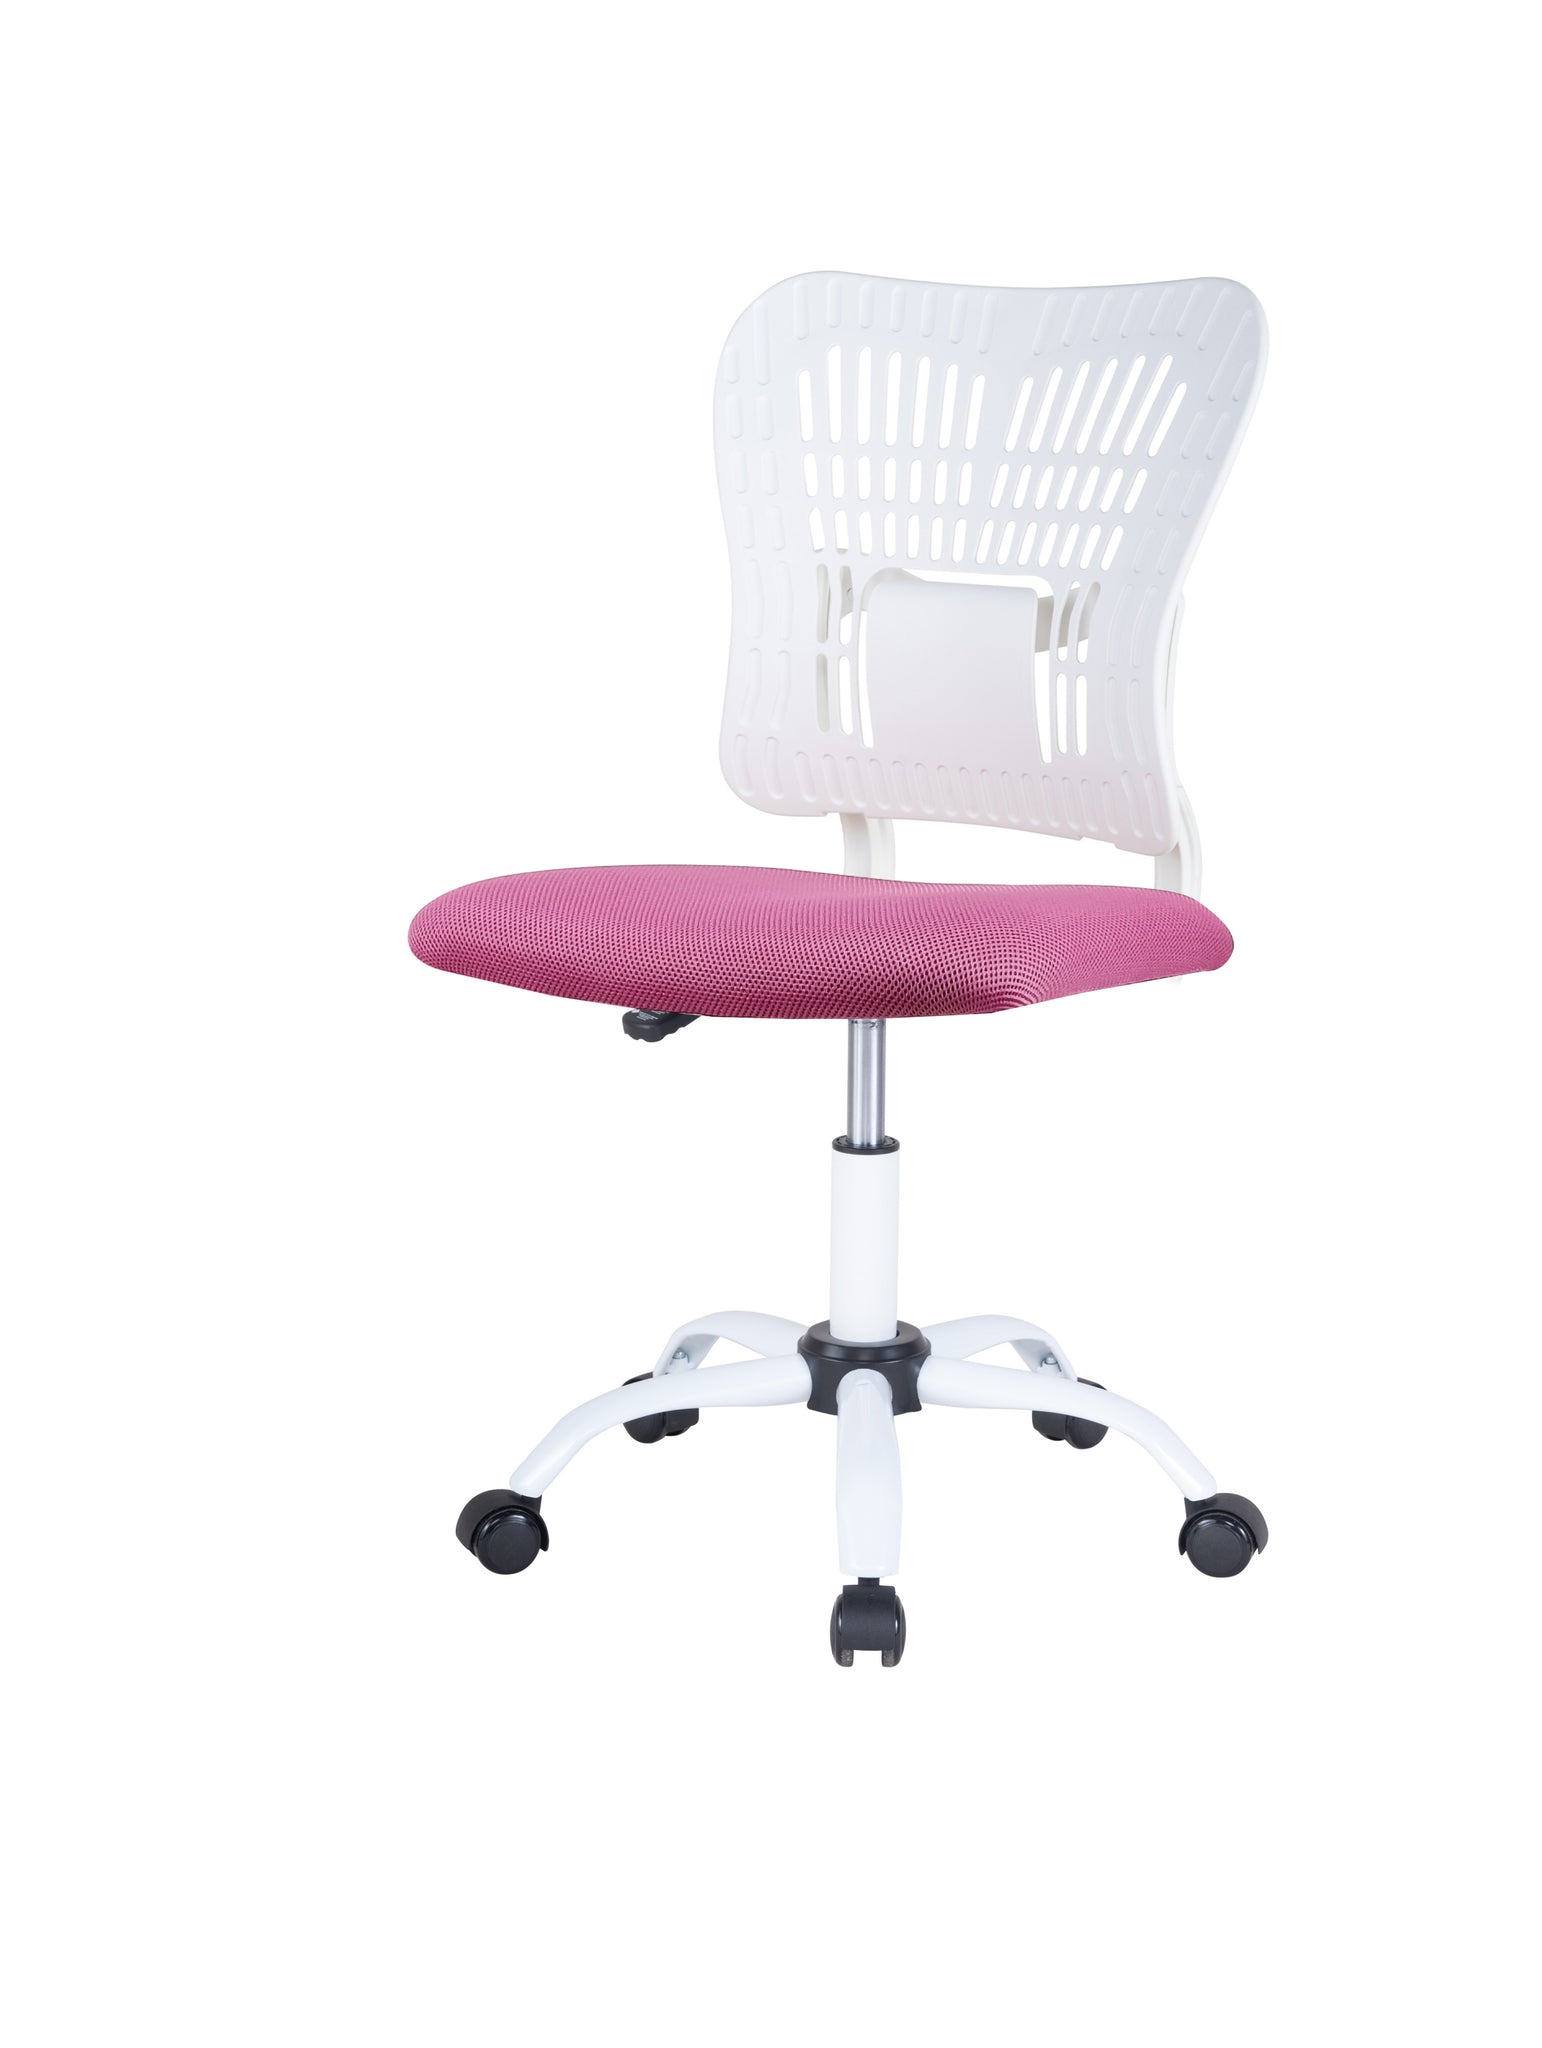 Home Office Chair Ergonomic Desk Chair Mesh Computer white+pink-fabric